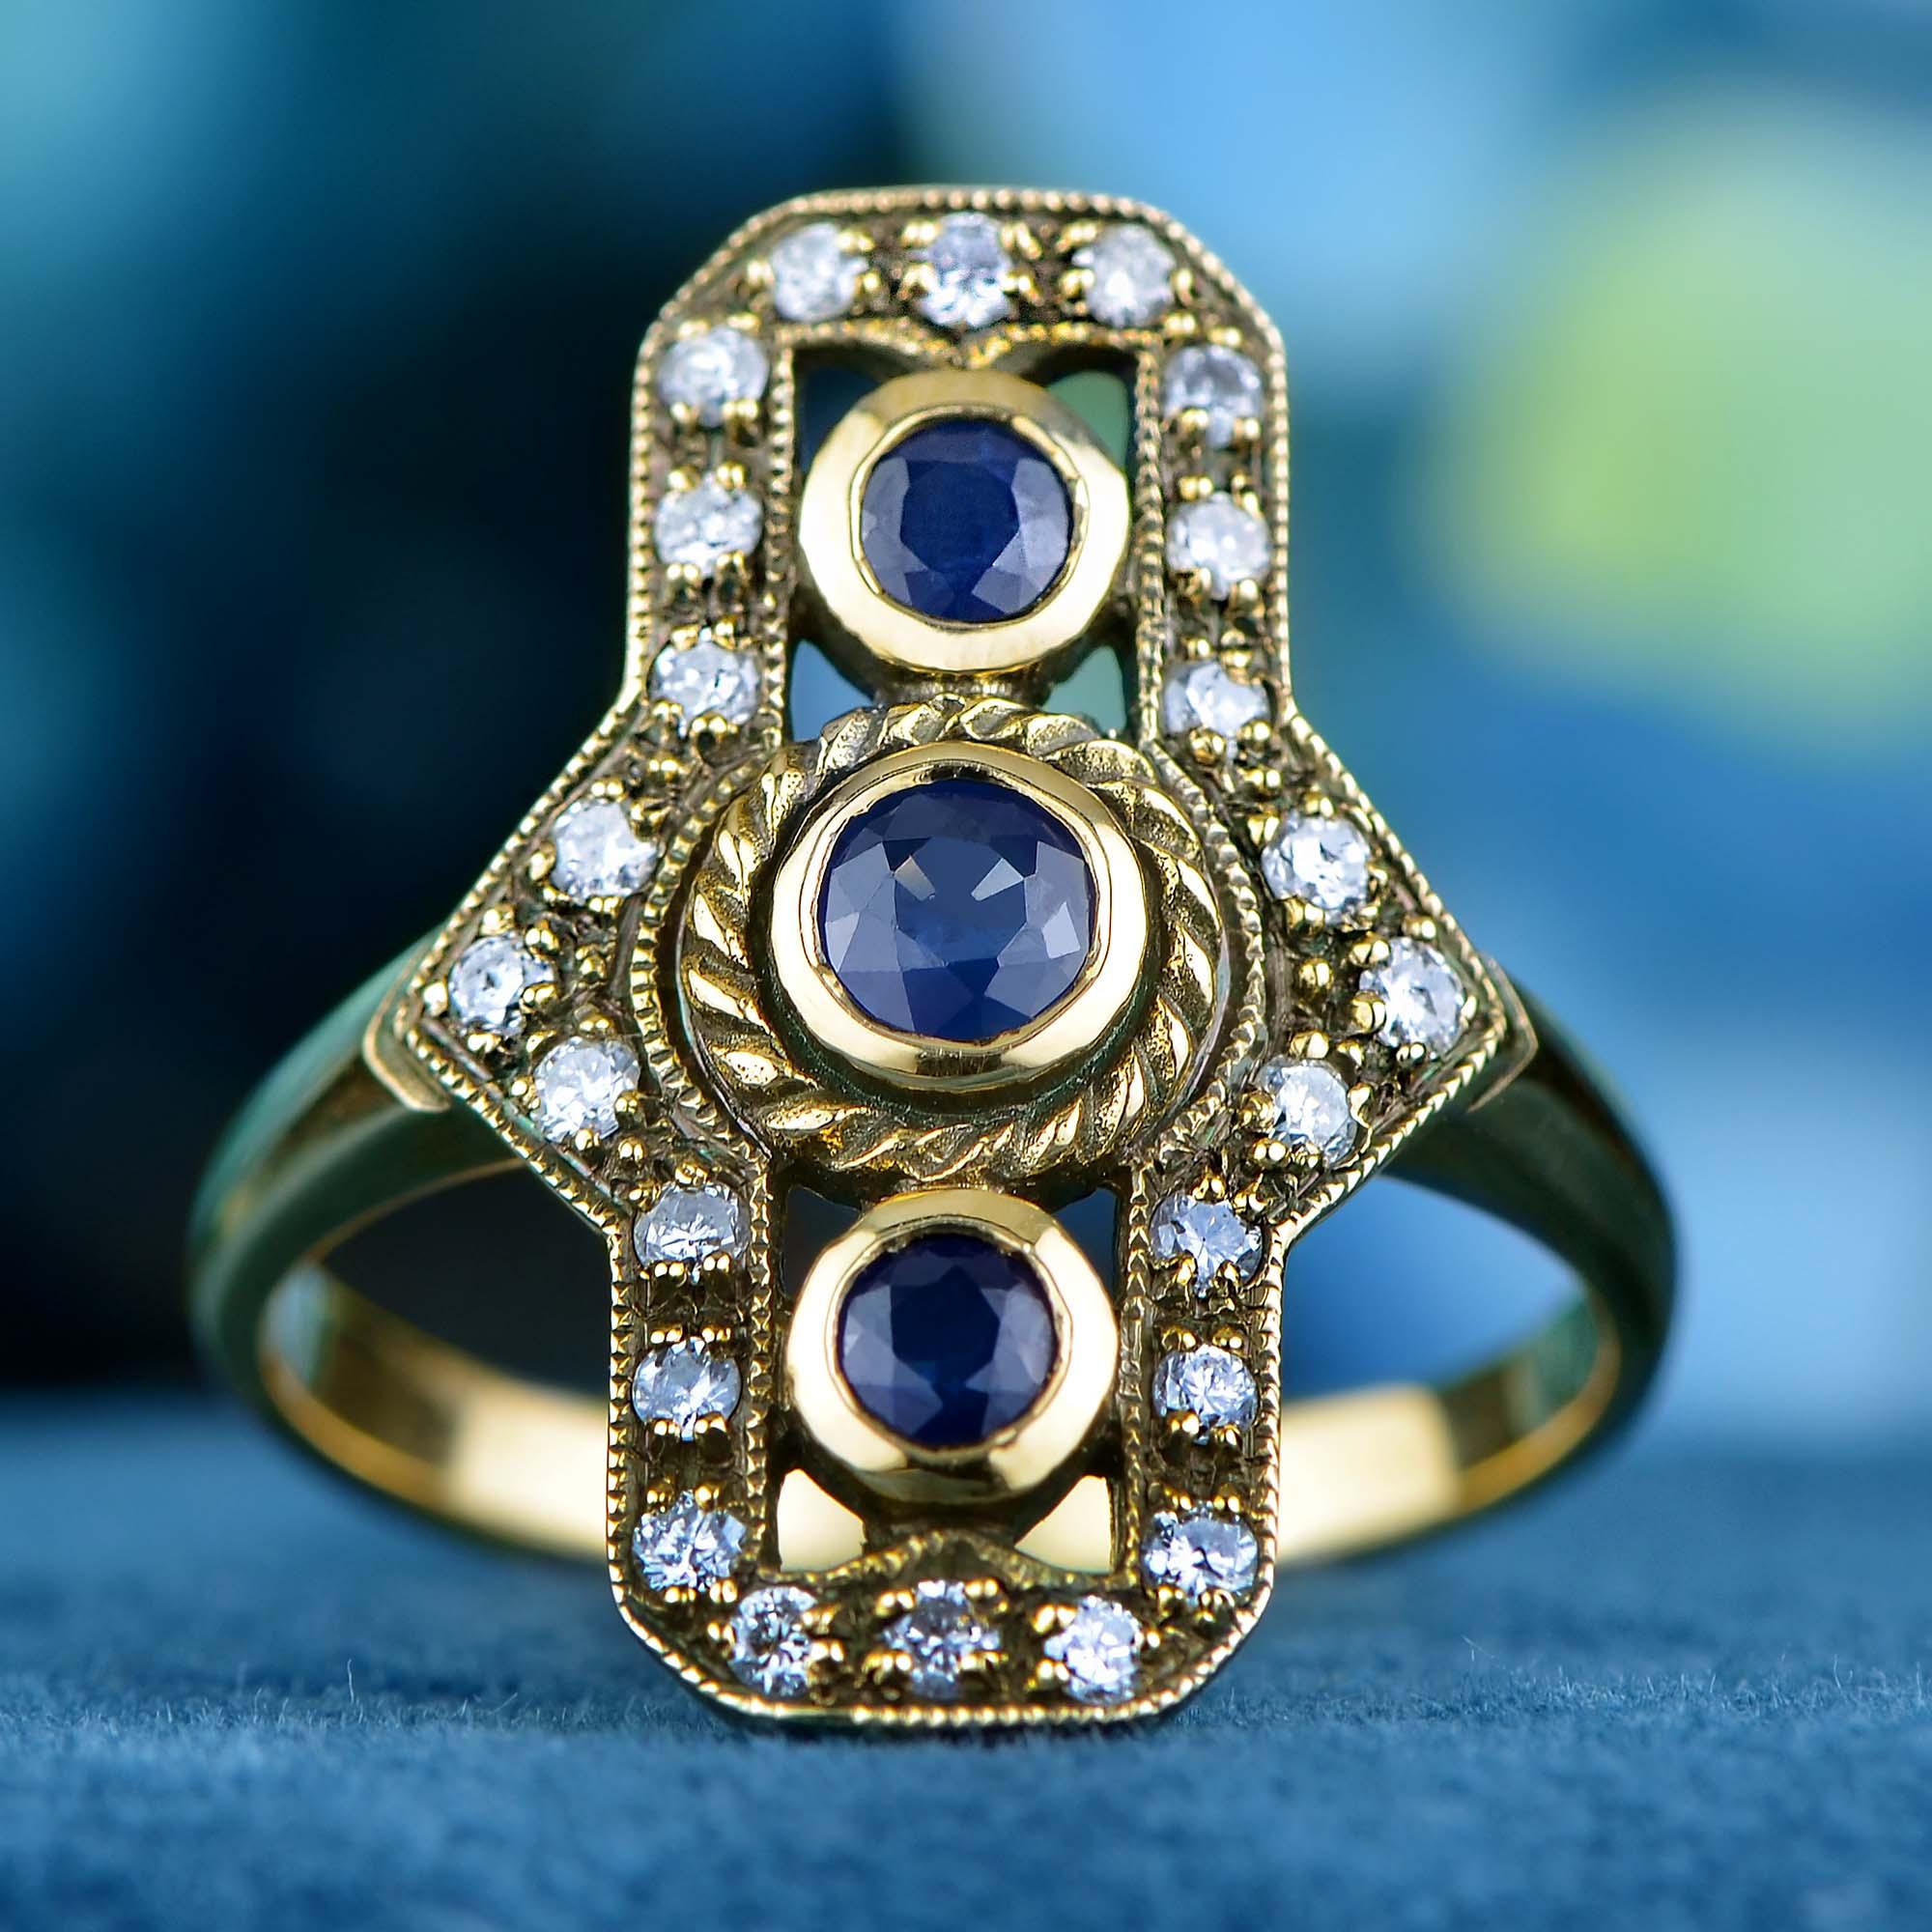 Add a delicate and unique aesthetic to your hand with this ring by GEMMA FILIGREE. Our antique design gold rings equate to delicacy and light openwork, while maintains strength for everyday wear for a lifetime.

This classic ring features twisted